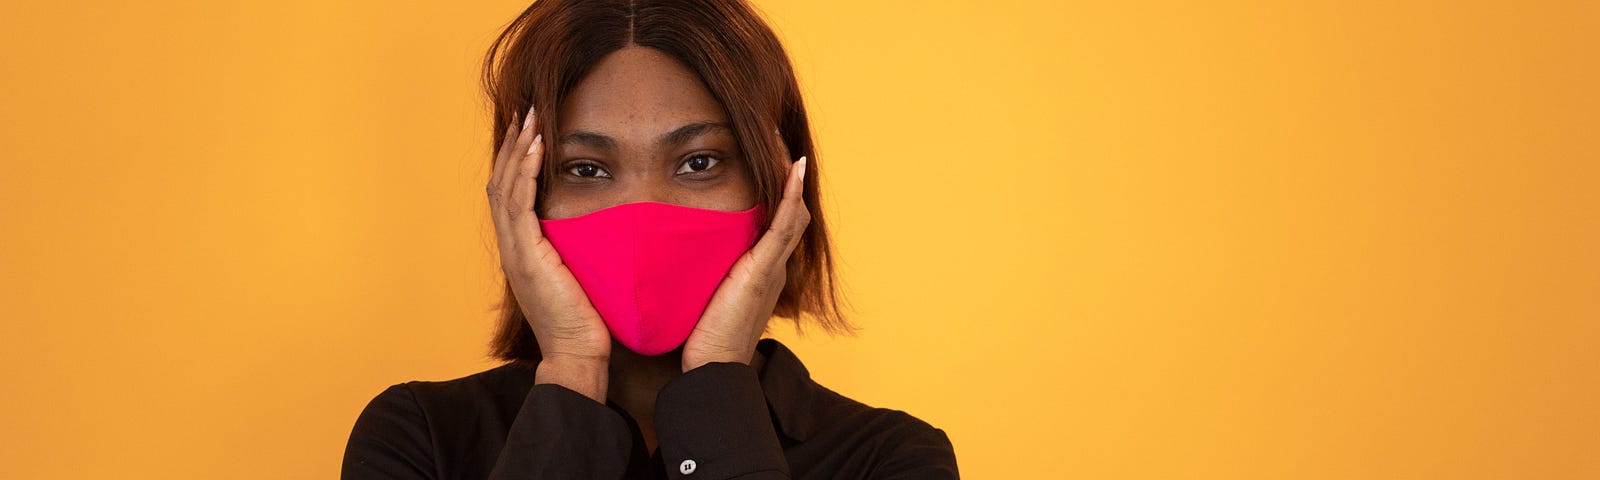 A woman wearing a long sleeved black button down shirt and a red face mask holds her hands to either side of her face and looks directly into the camera. She is posed against a dark yellow background.